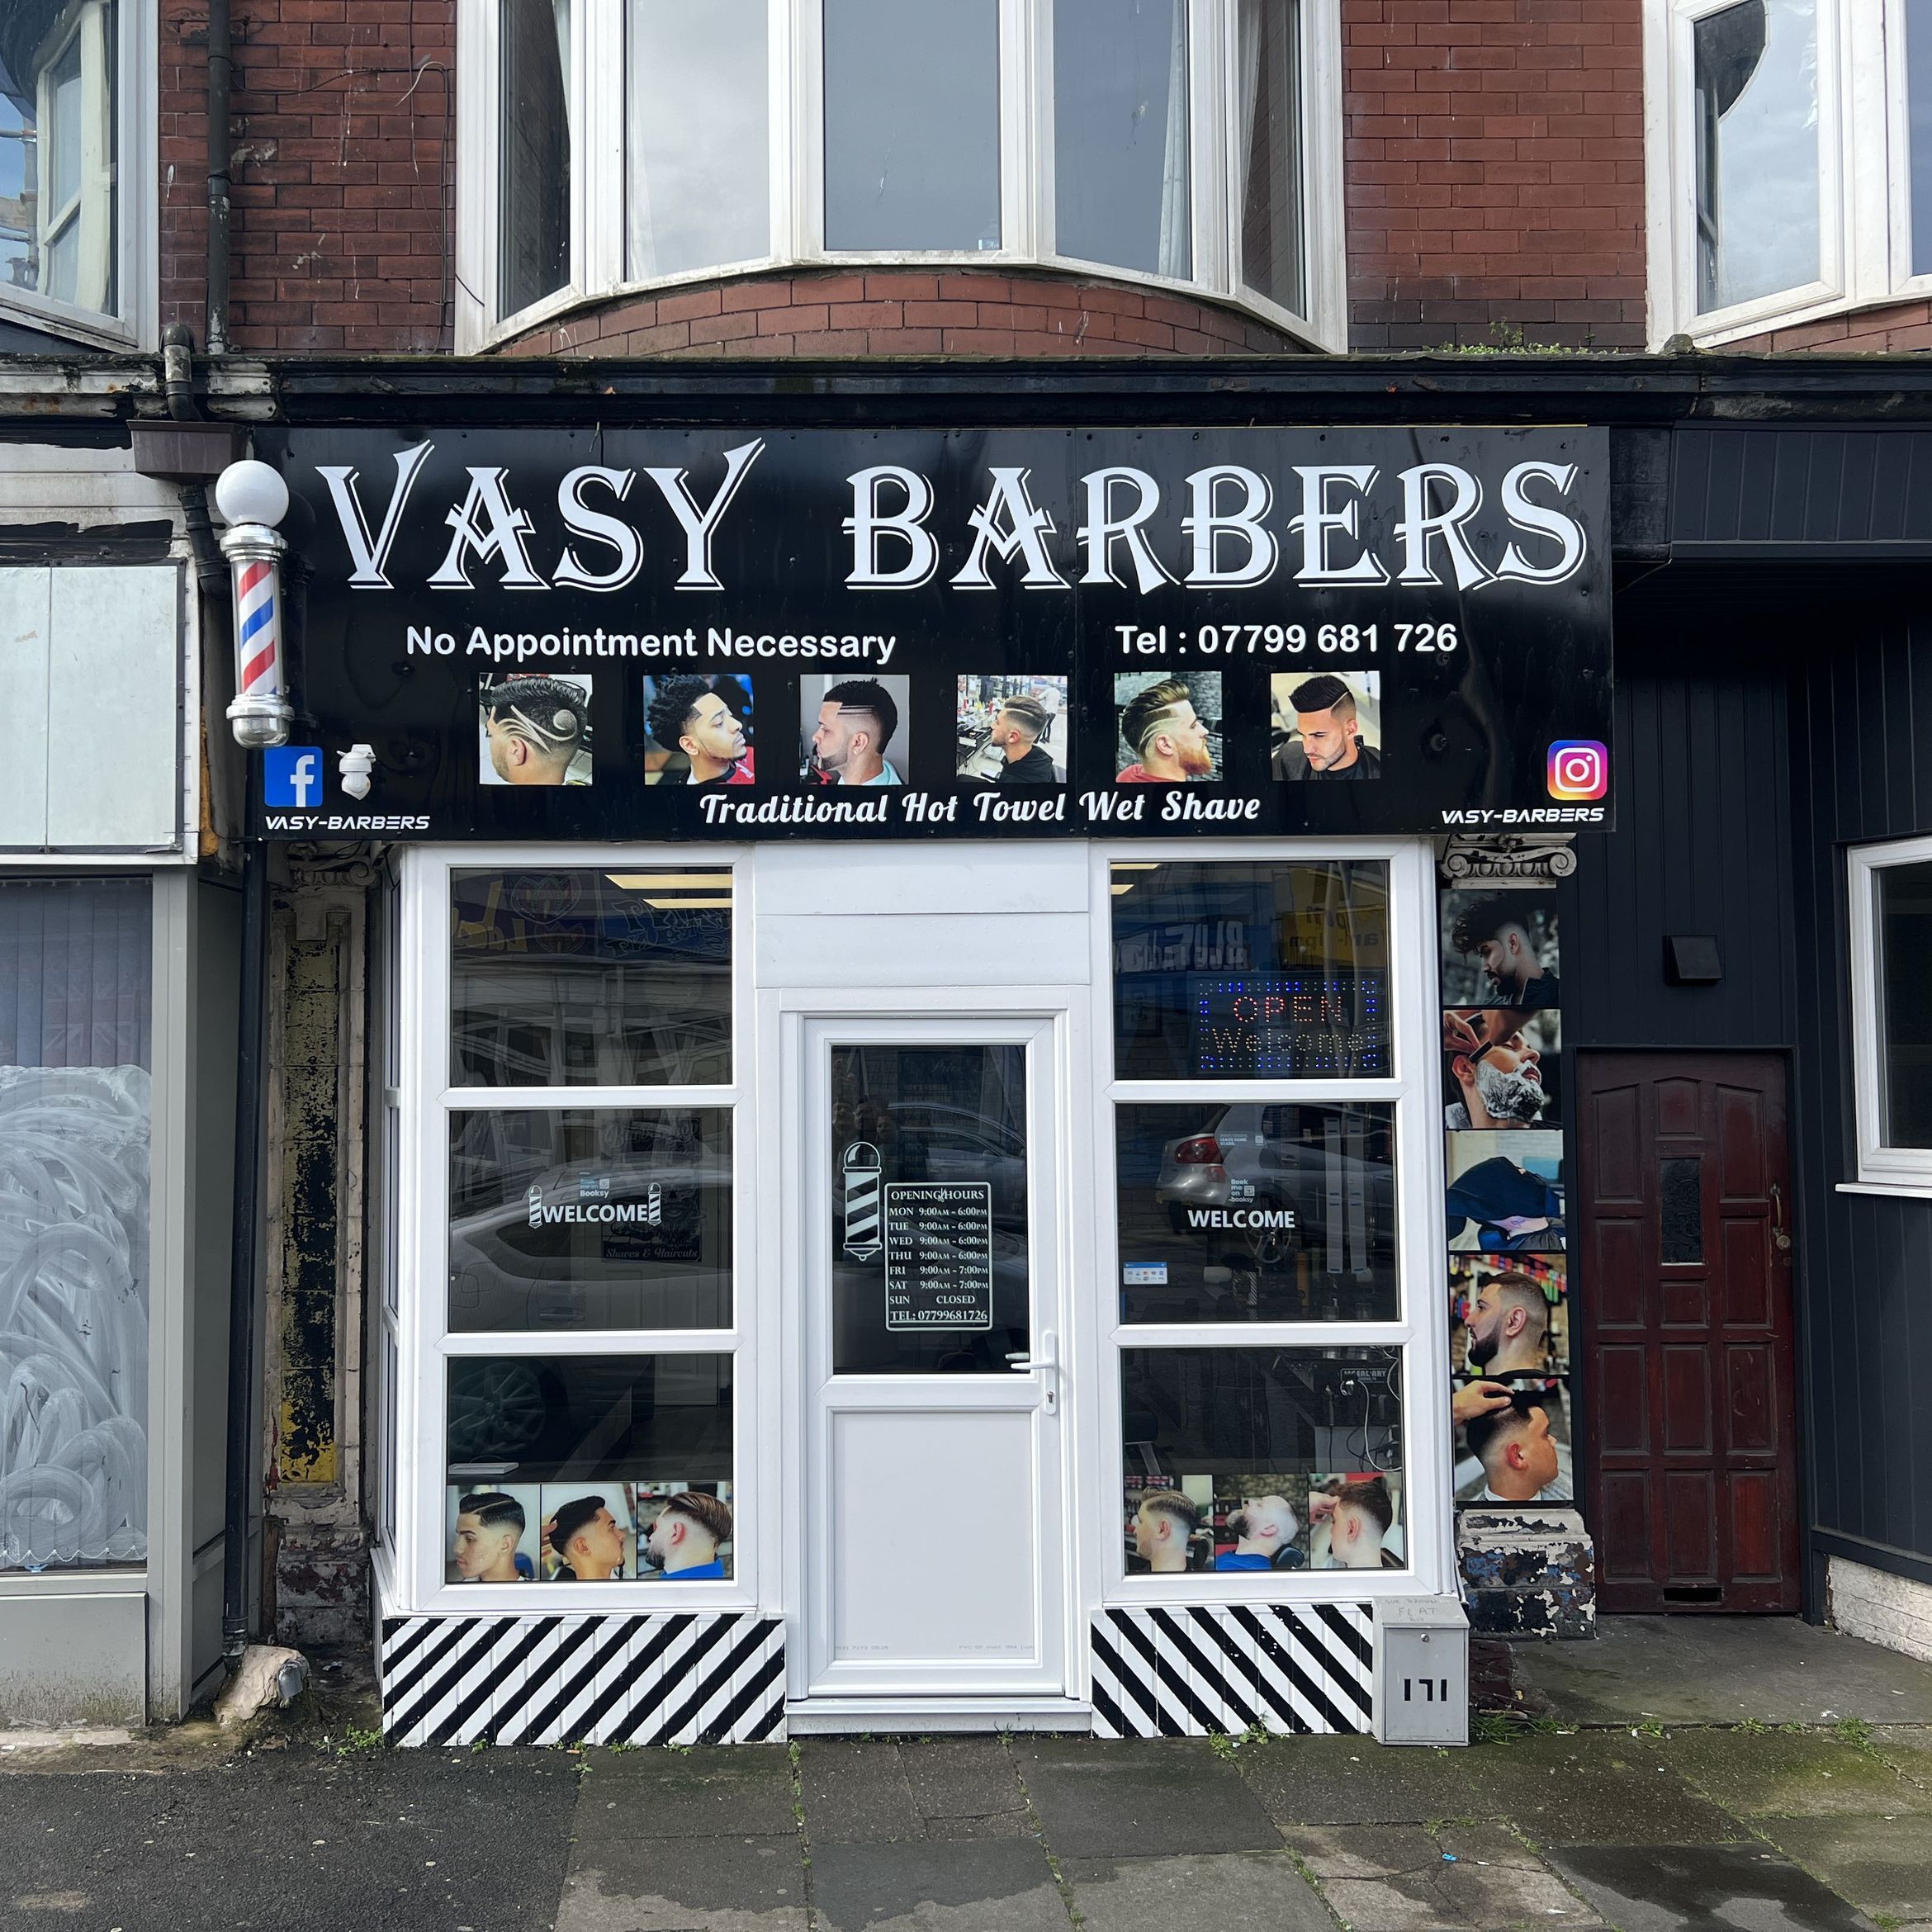 VASY BARBERS, 171 Central Drive, FY1 5ED, Blackpool